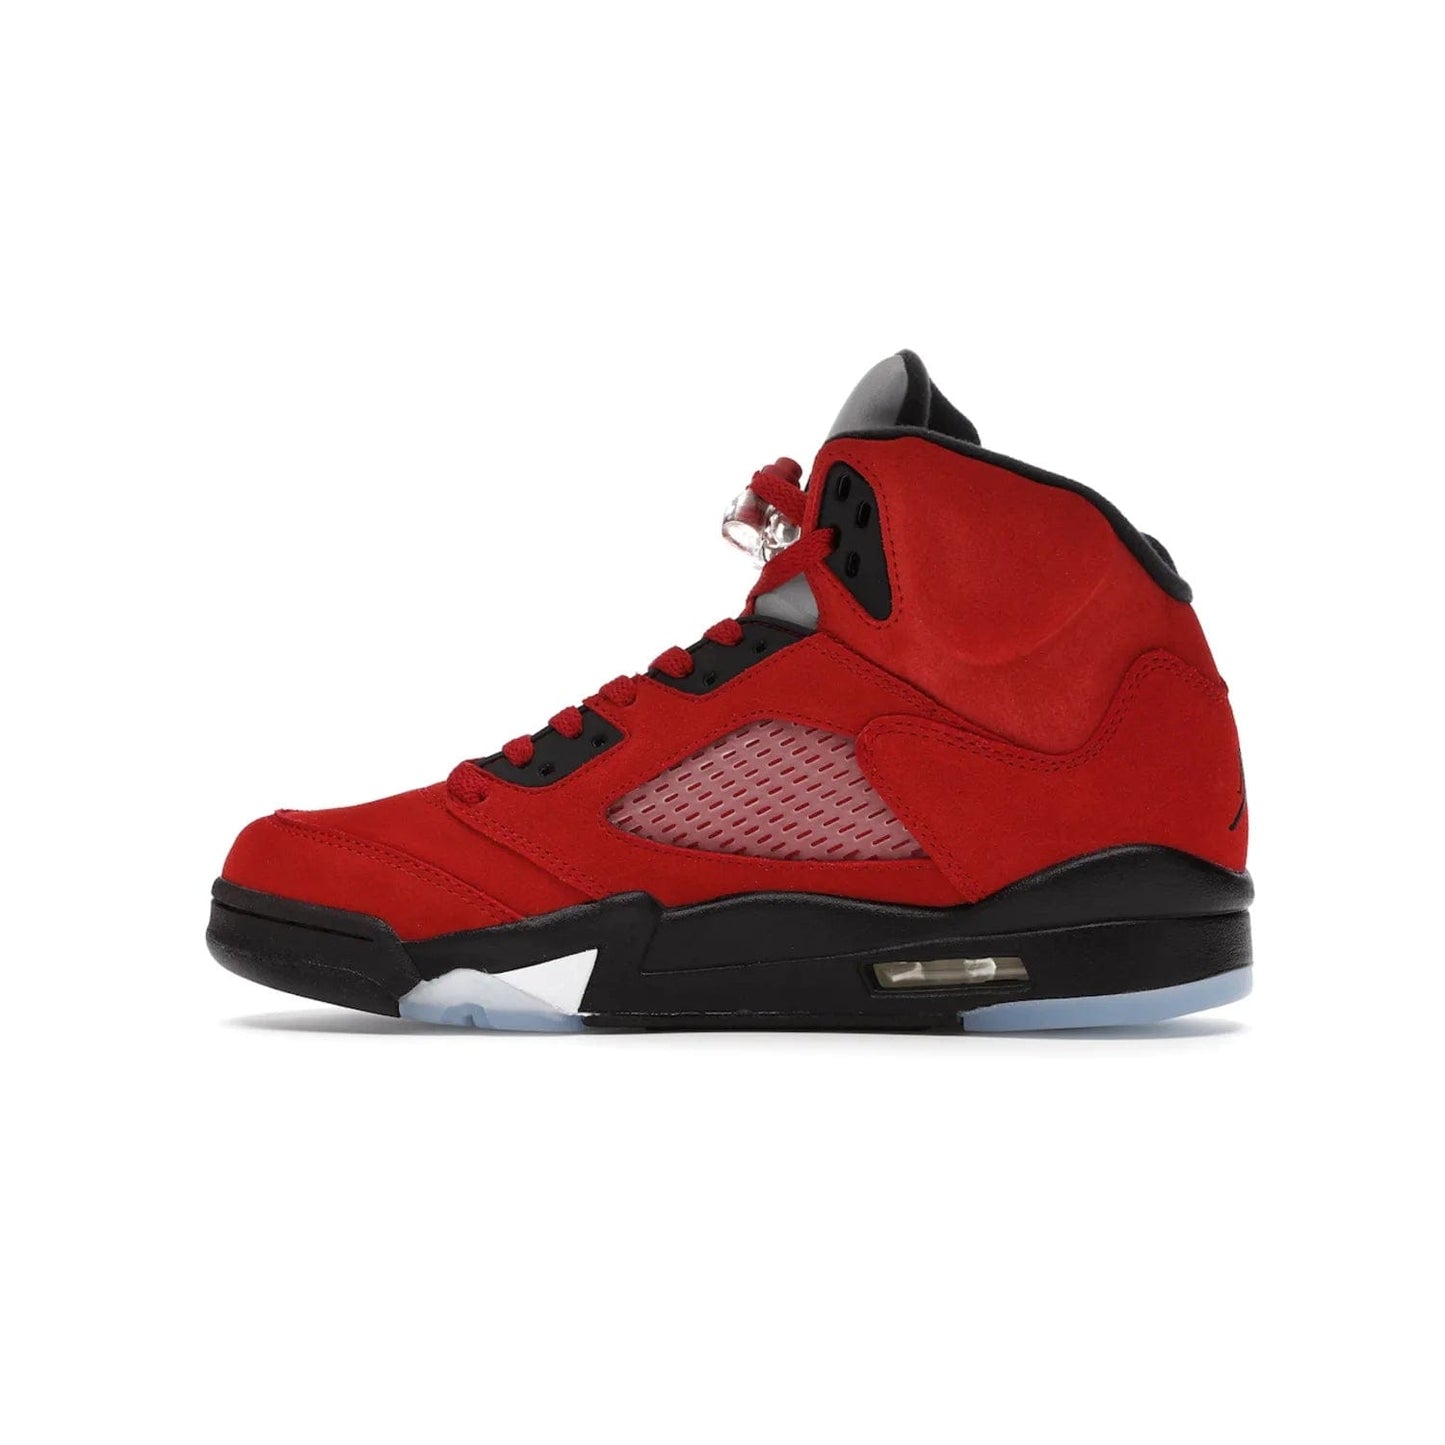 Jordan 5 Retro Raging Bull Red (2021) - Image 20 - Only at www.BallersClubKickz.com - Get ready for the 2021 stand-alone release of the Air Jordan 5 Raging Bulls! This all-suede upper combines luxe details like a Jumpman logo, red & black "23" embroidery and shark tooth detailing, atop a black midsole. Don't miss out - release date in April 2021 for $190.